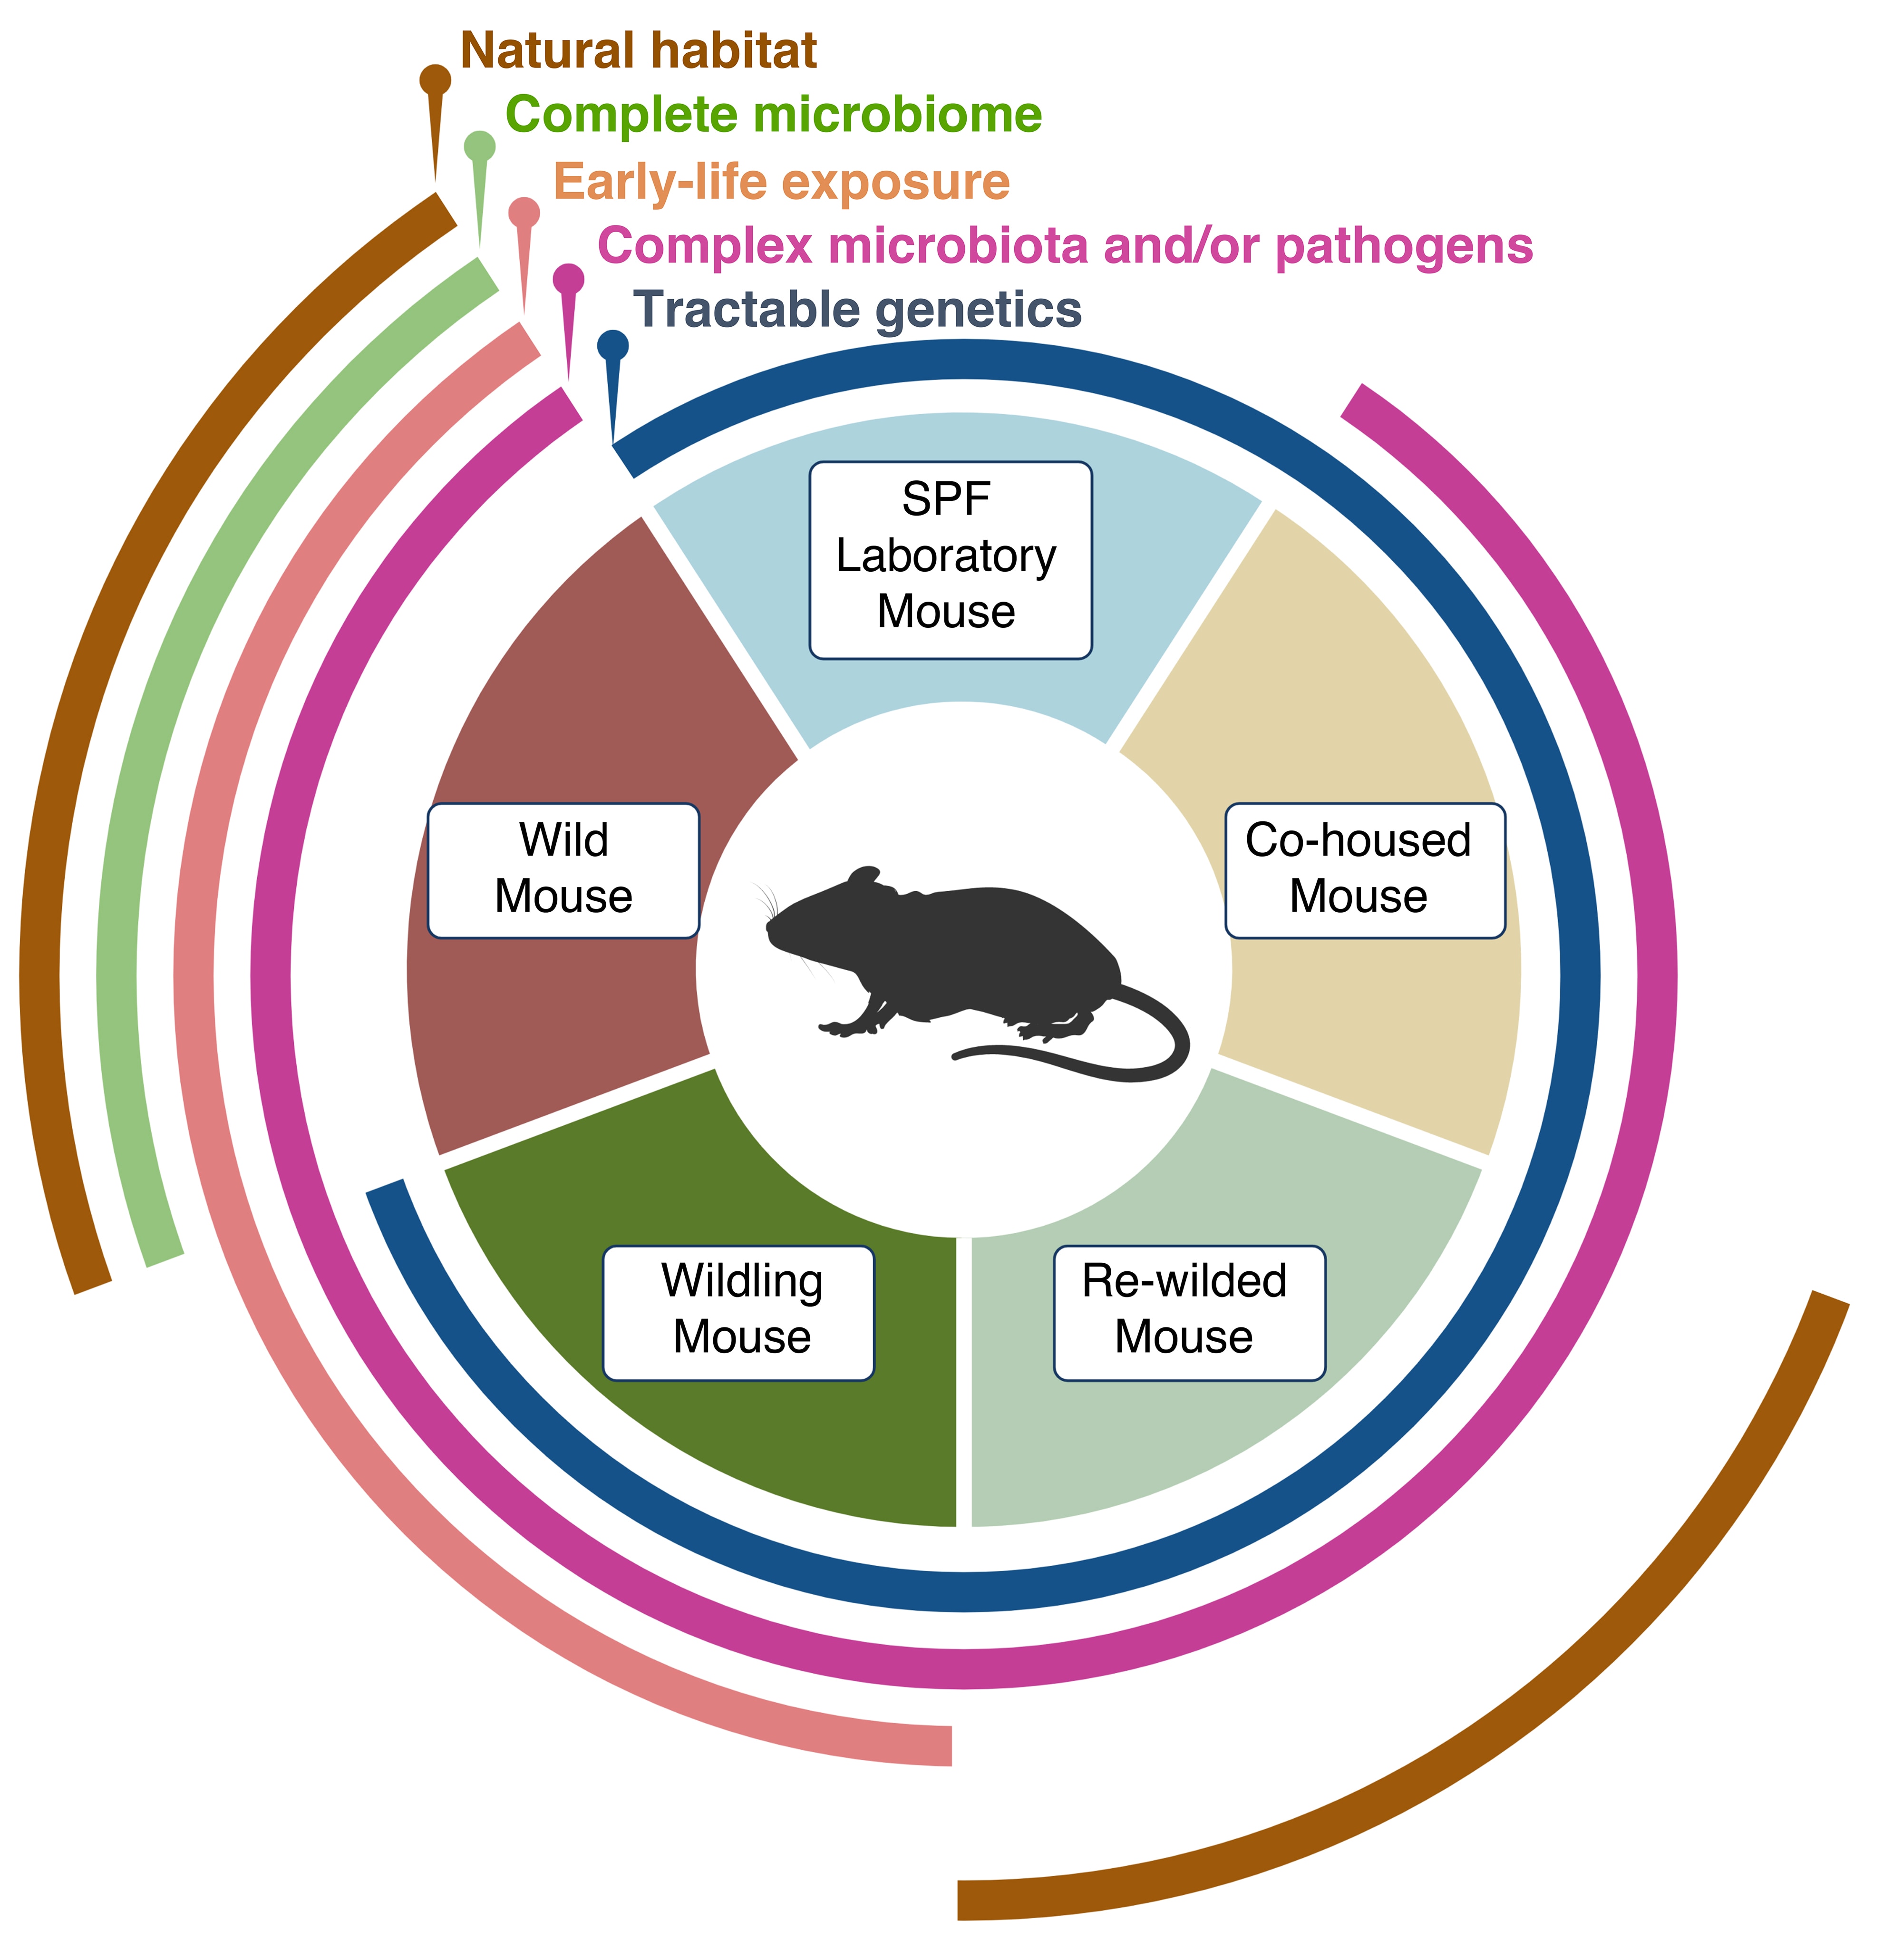 Diagram of mouse models with differing microbiota.